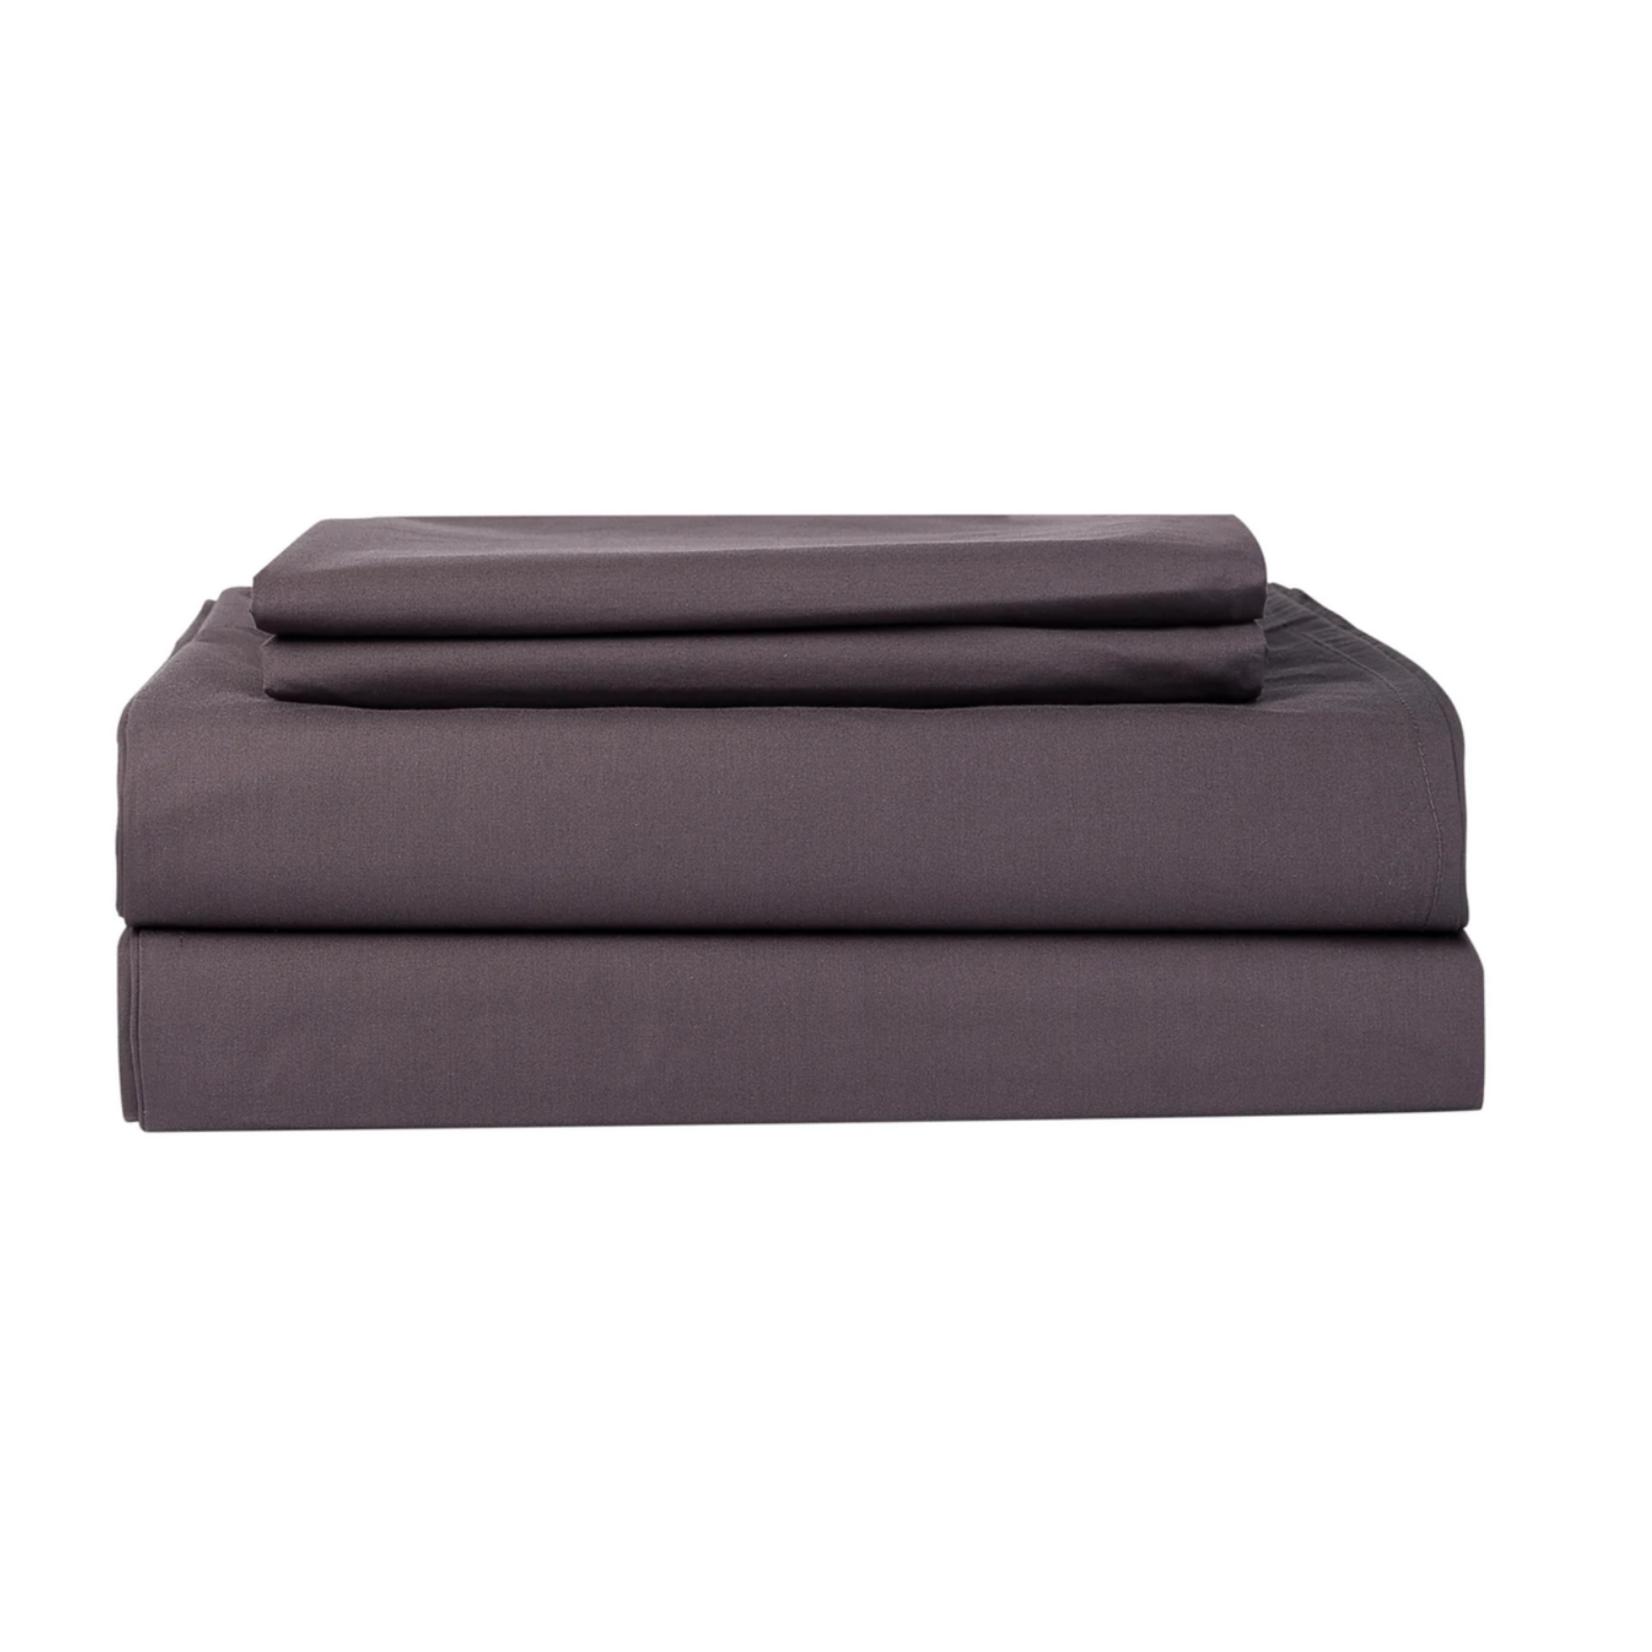 Cuddle Down Percale Deluxe Slate King Sheet Set